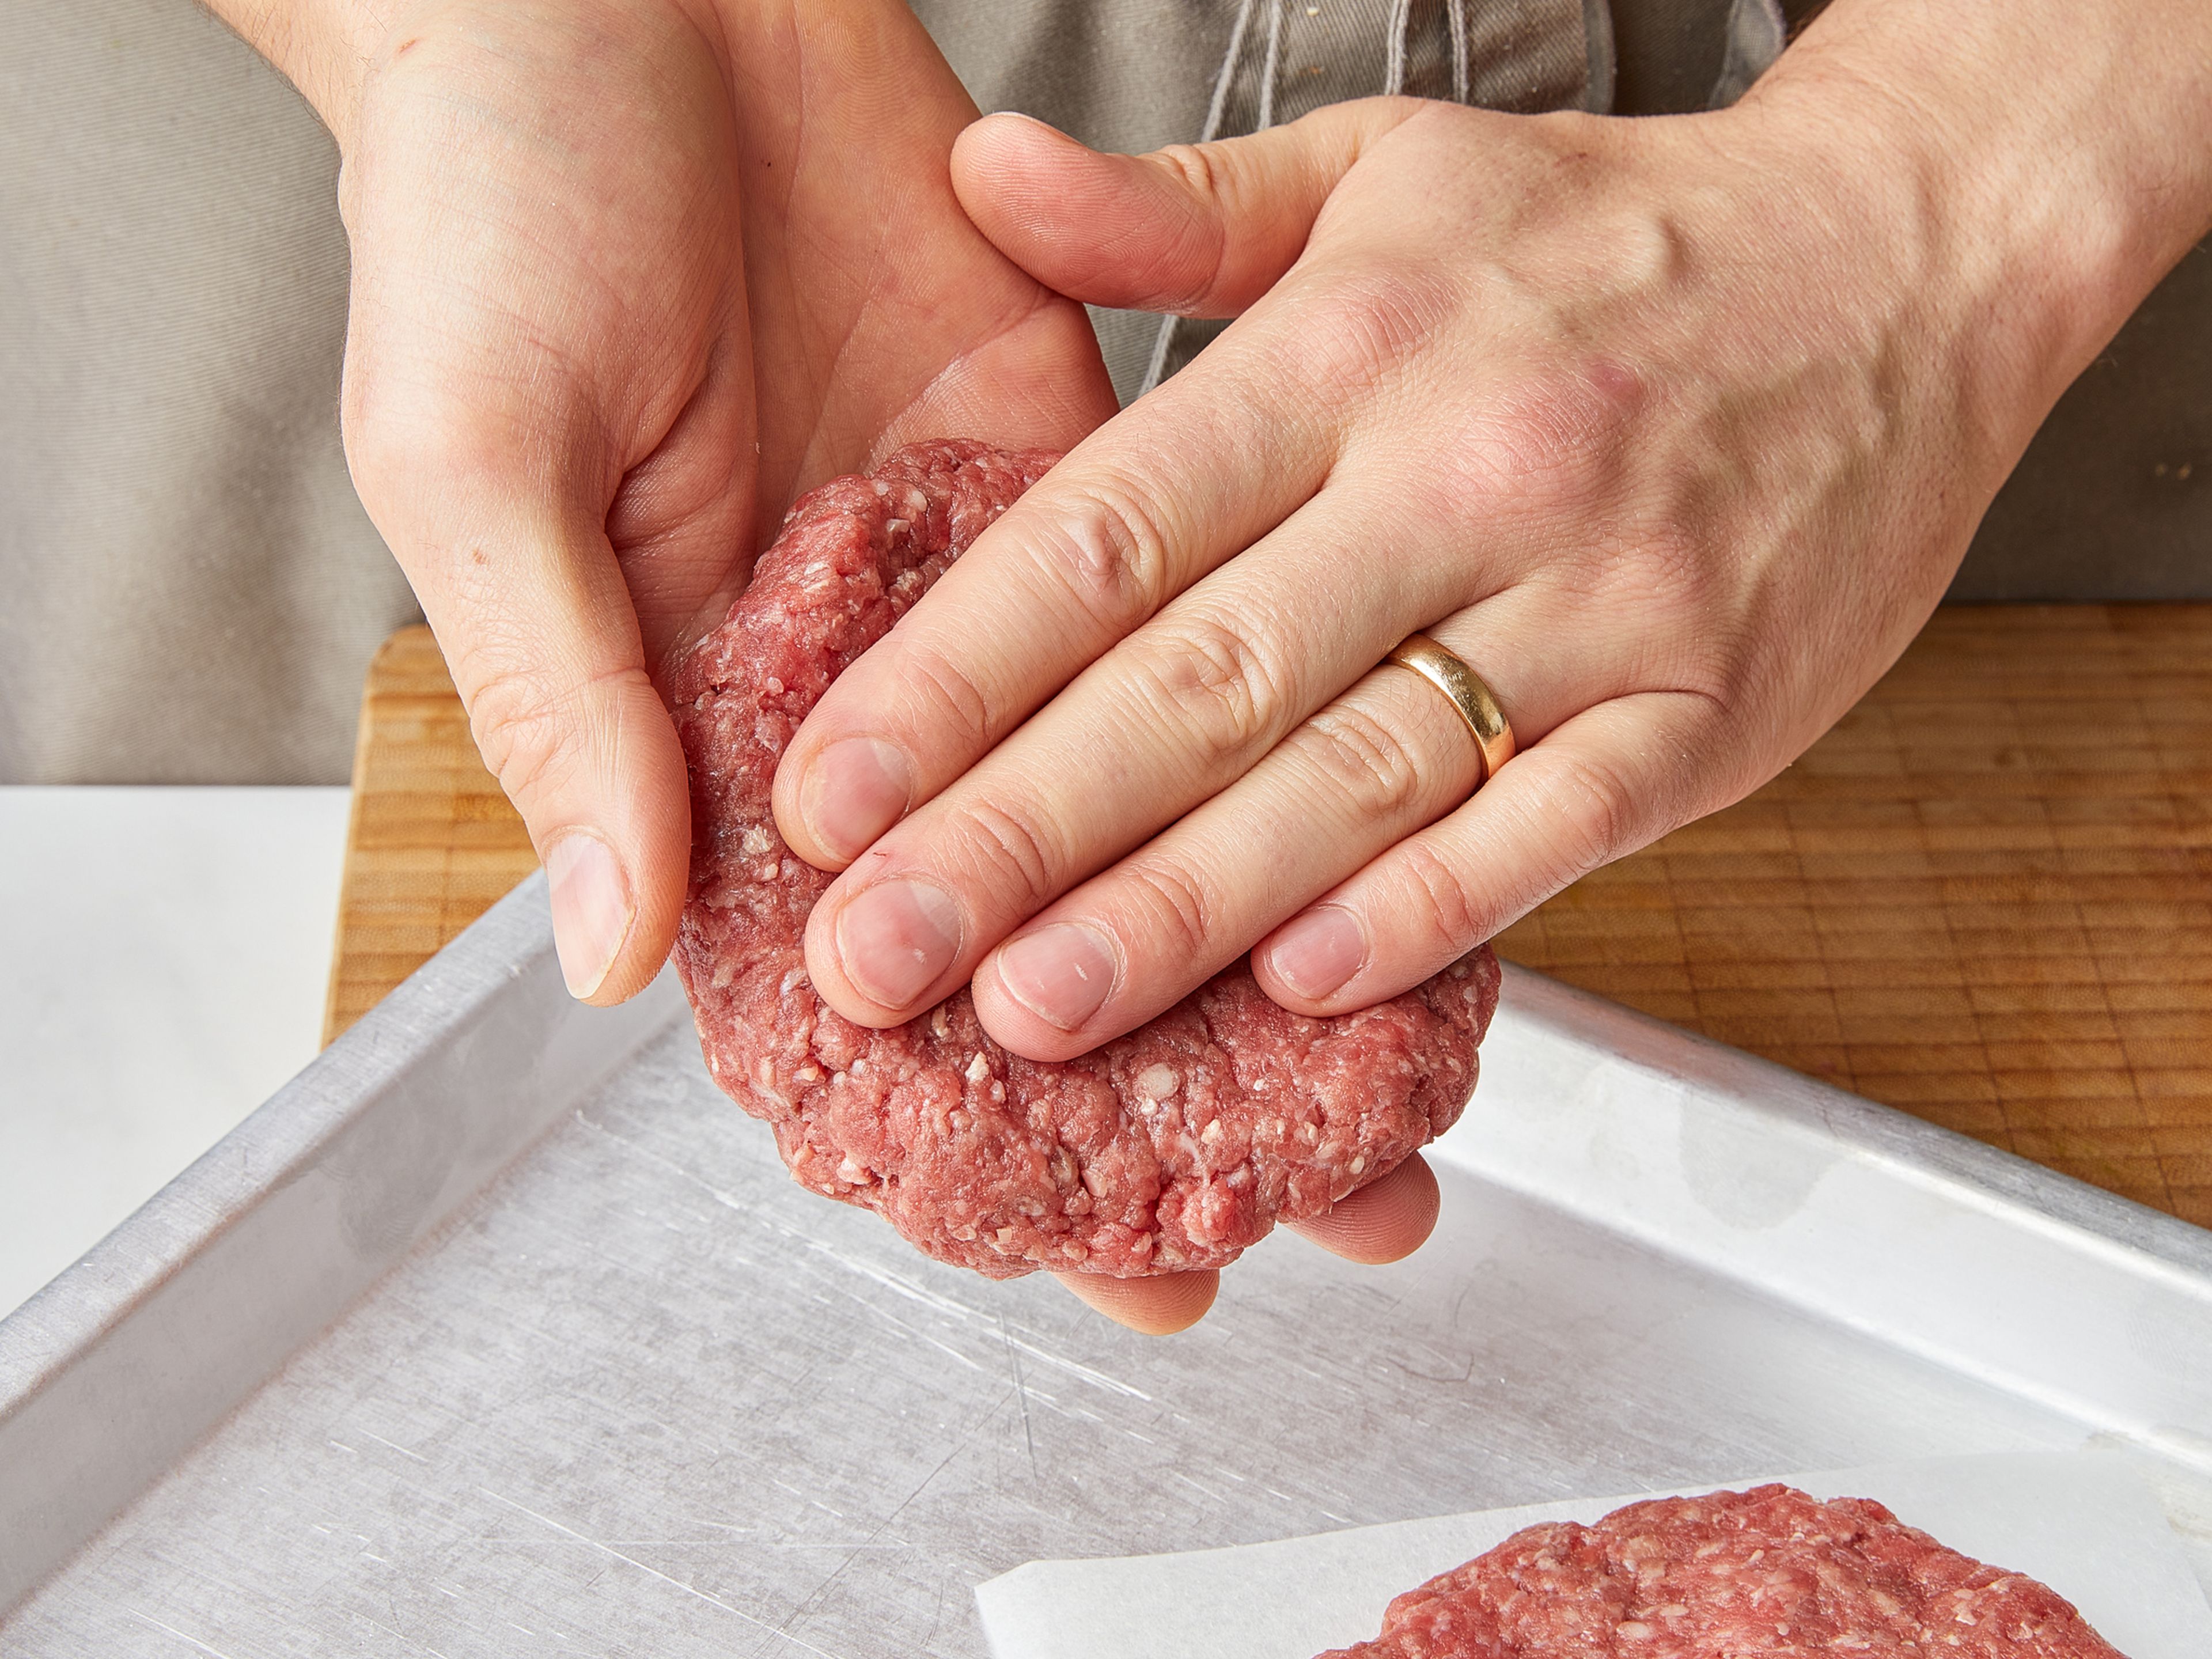 Peel onions and cut into fine rings. For the burger patties, shape the ground beef into one flat burger patty per person, approx. 1 cm/ 0.4 in. thick.